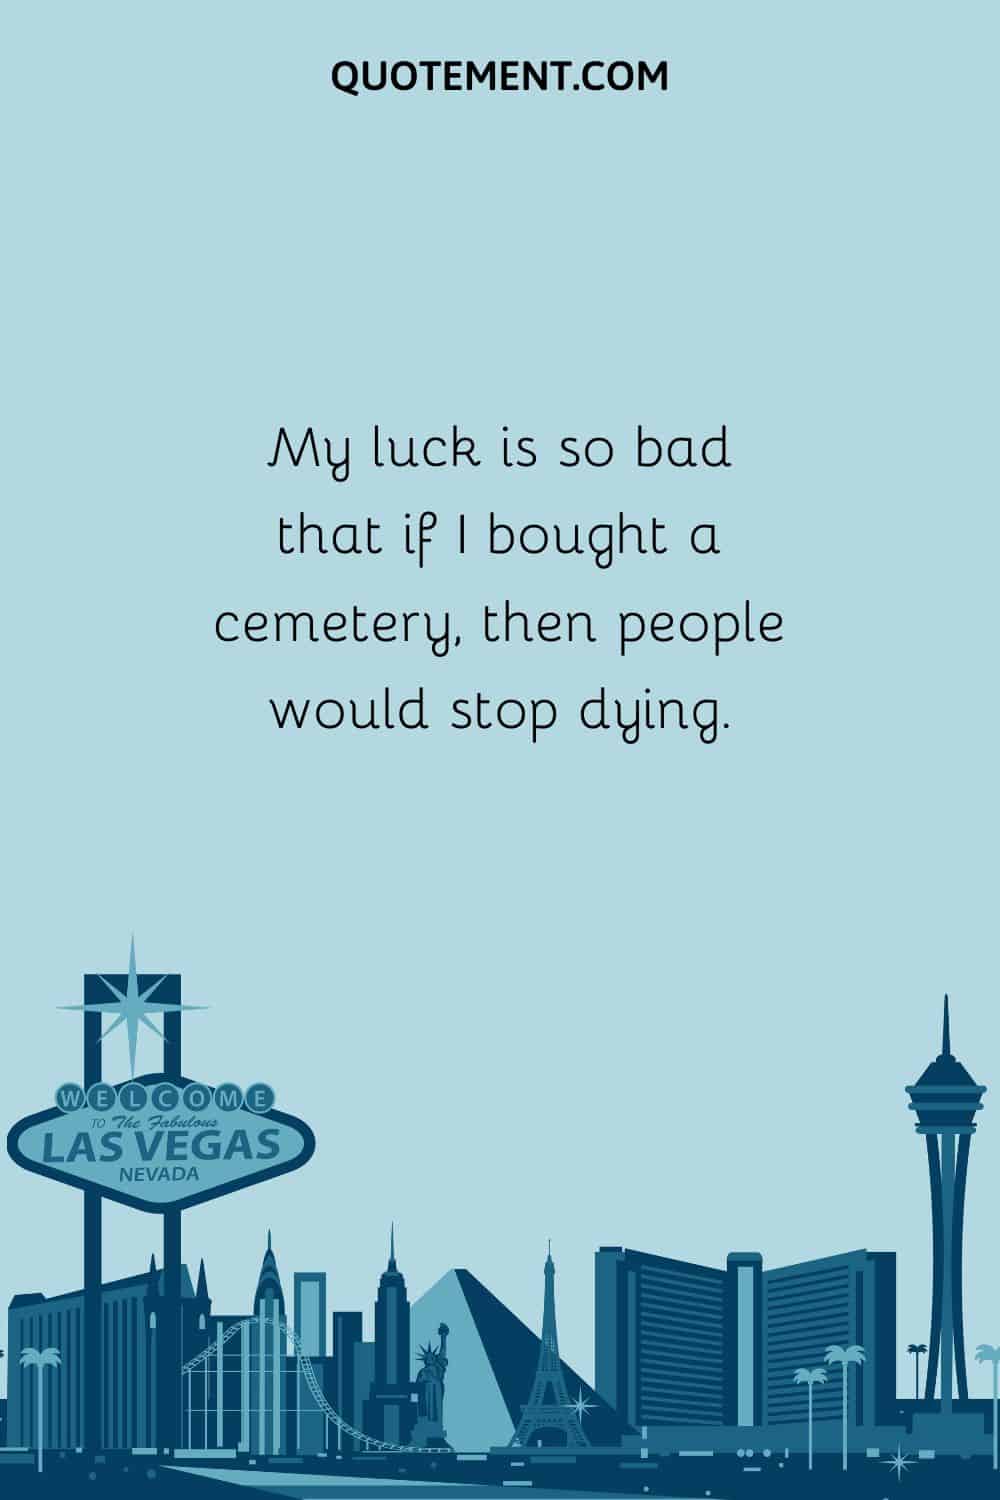 My luck is so bad that if I bought a cemetery, then people would stop dying.